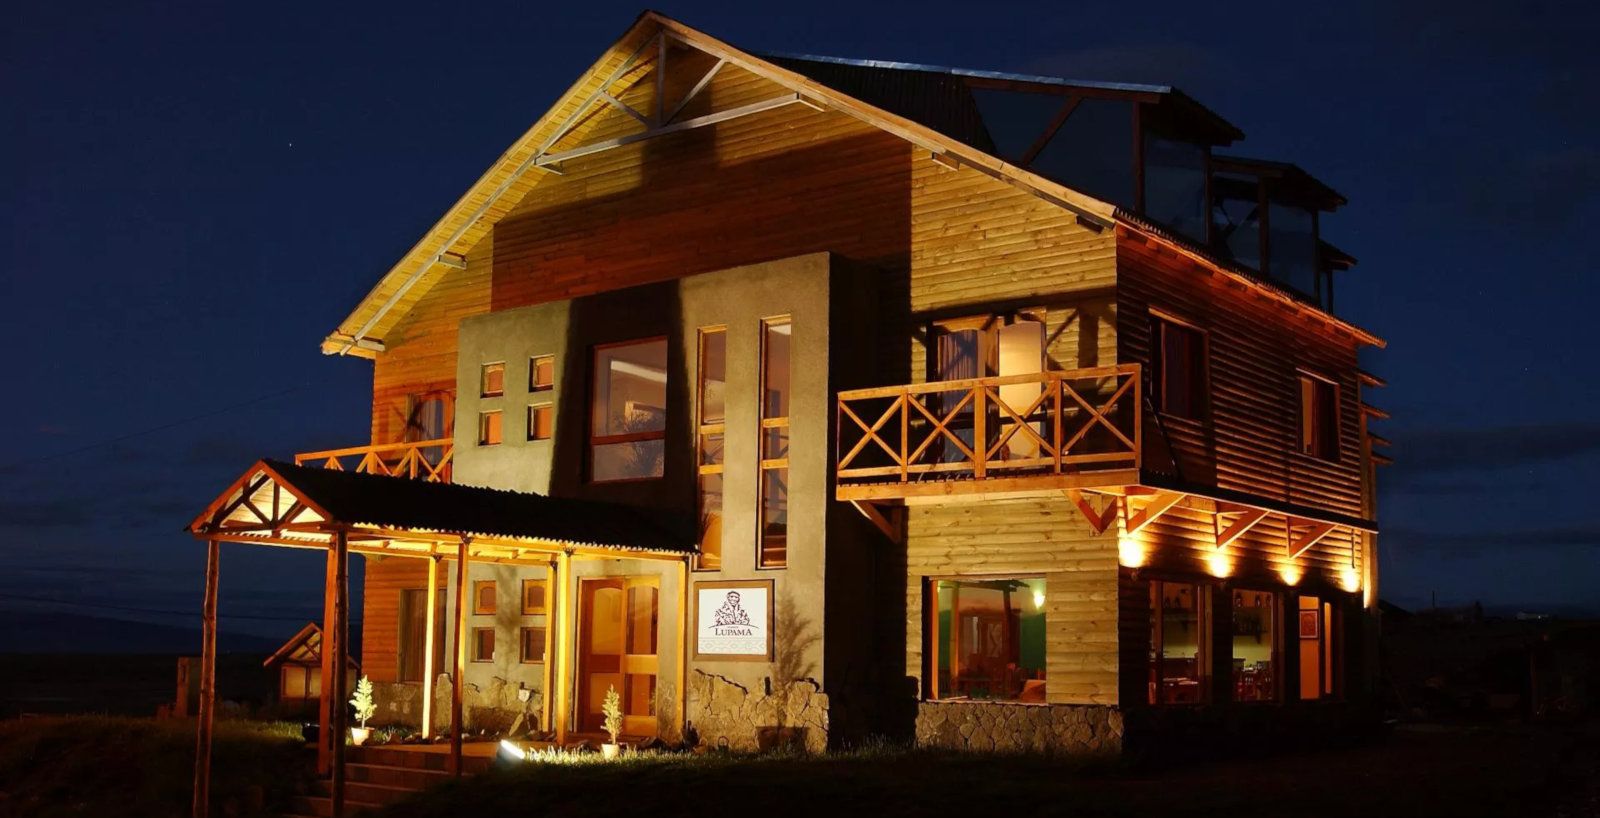 Gay travellers to Patagonia will find Hosteria Lupama a cosy place to relax in El Calafate.